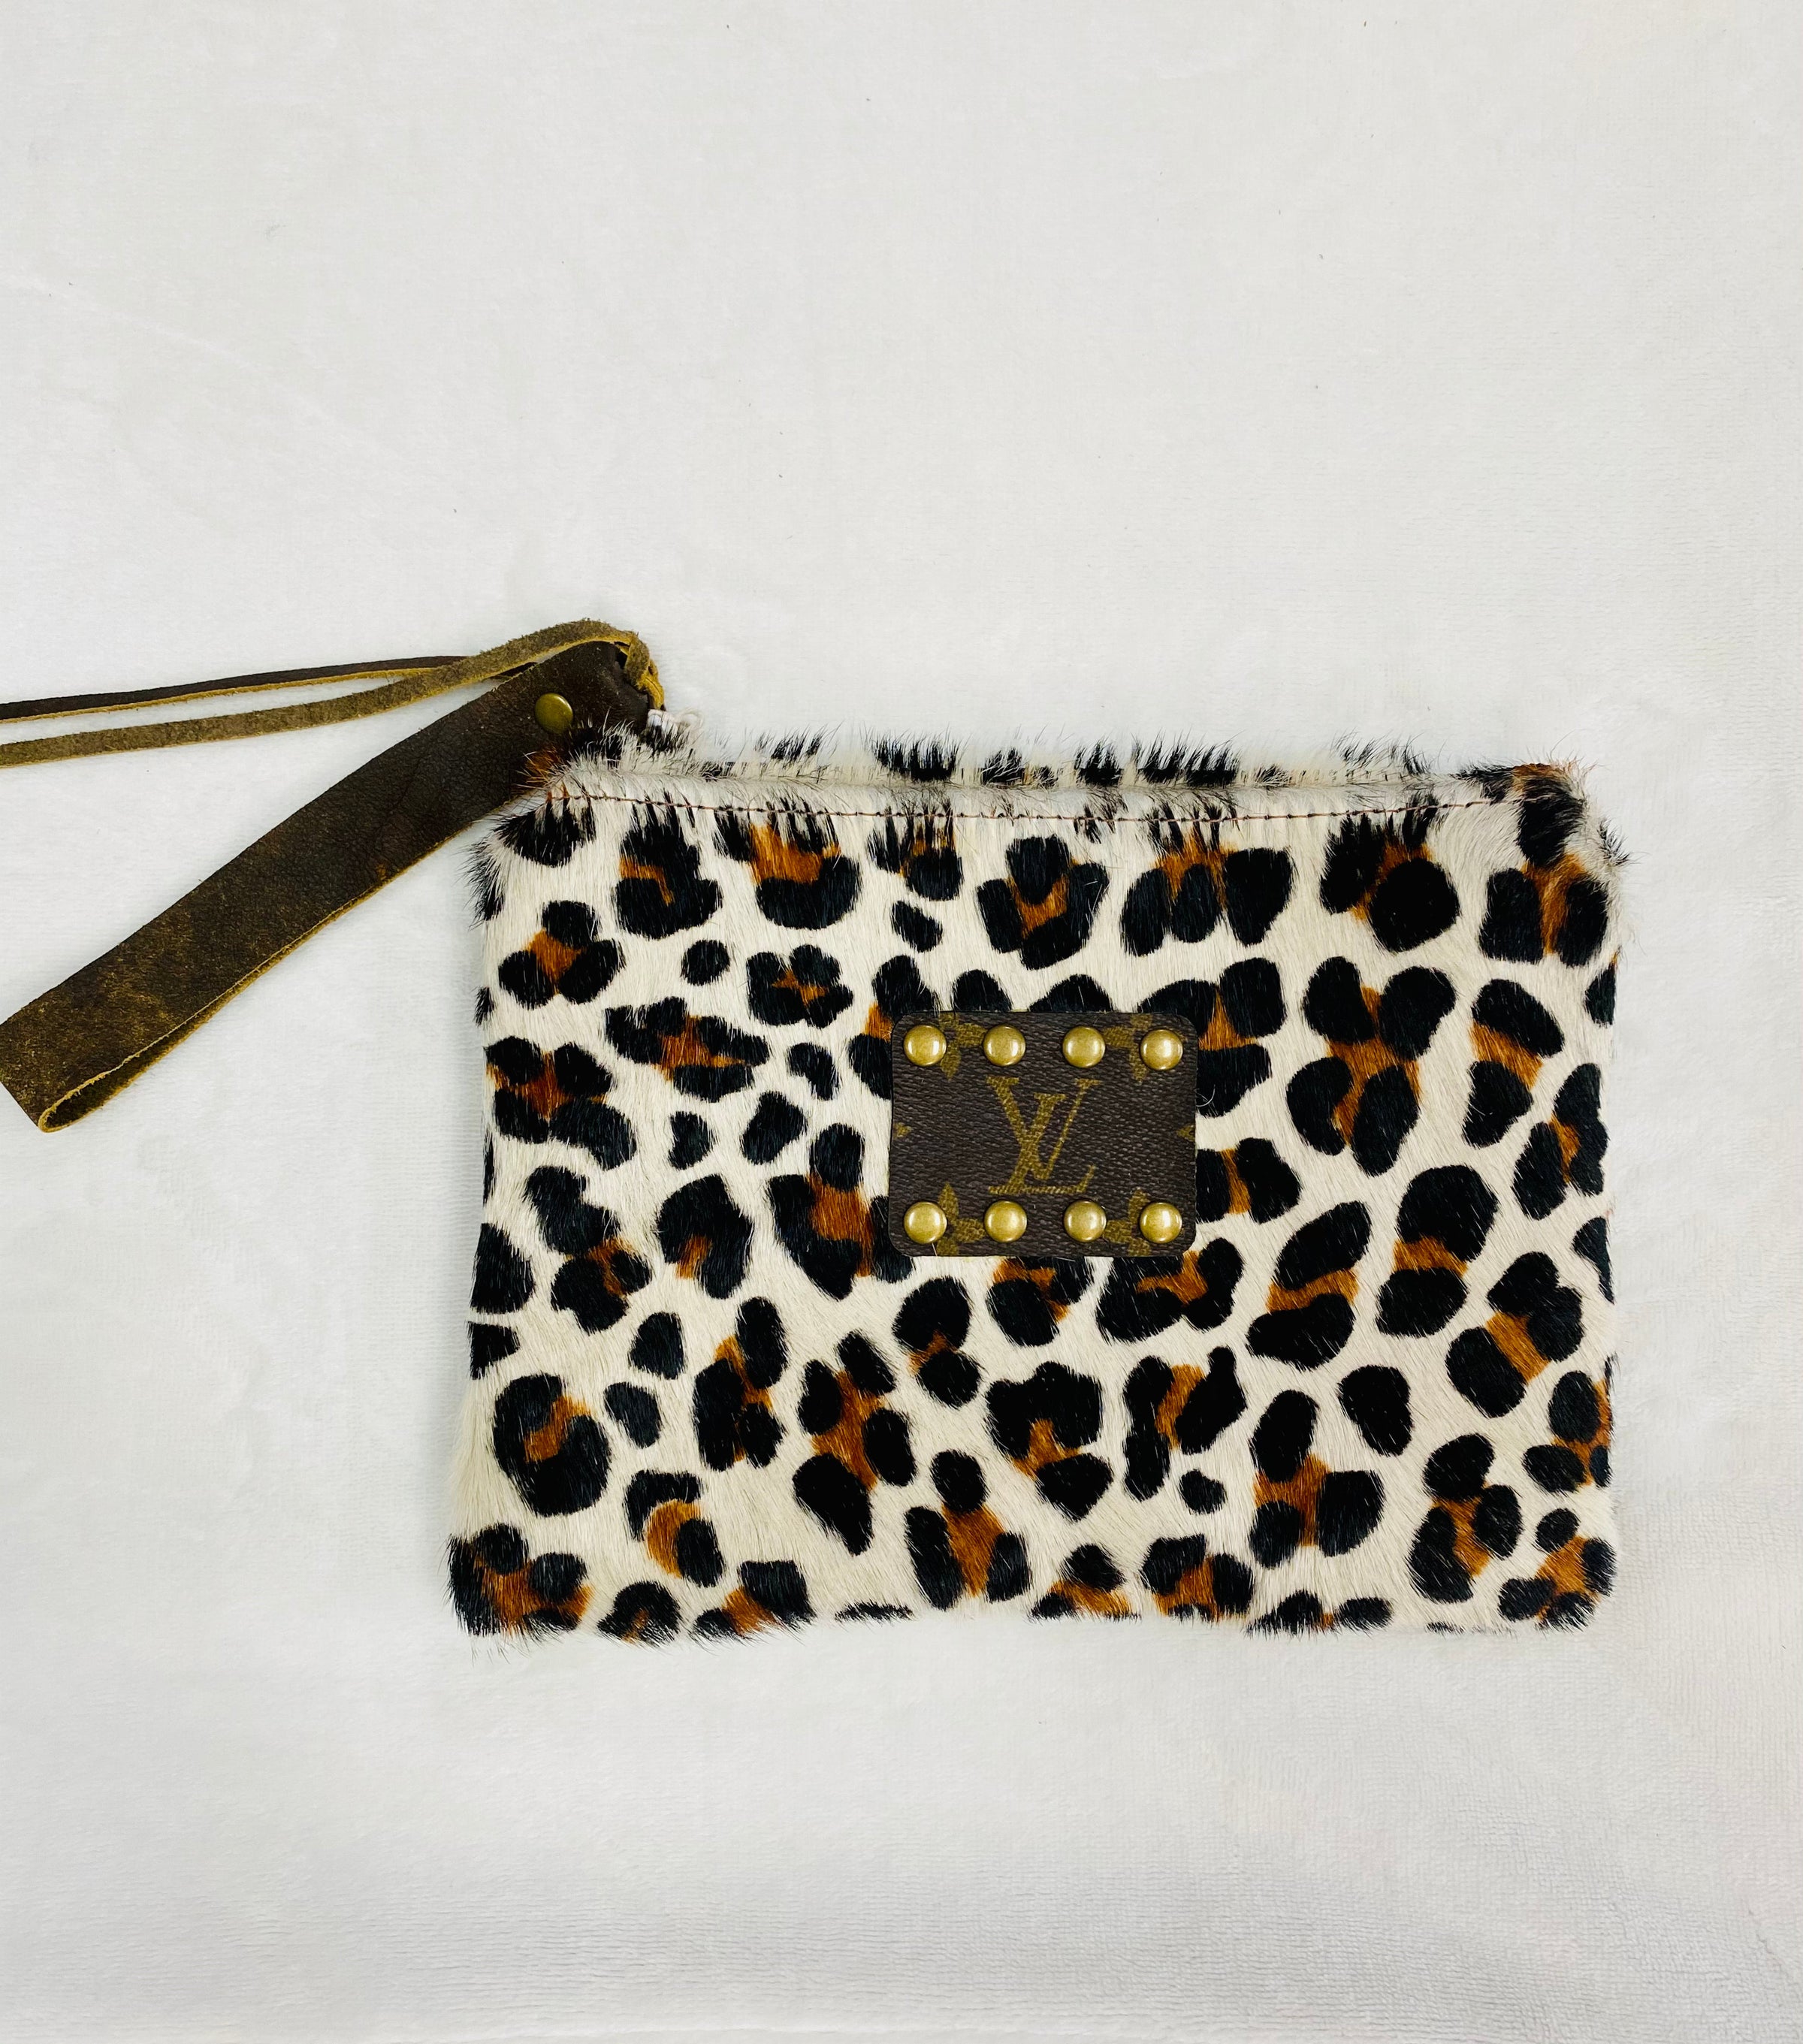 Louis Vuitton Upcycled Cowhide Purse - $55 (72% Off Retail) - From